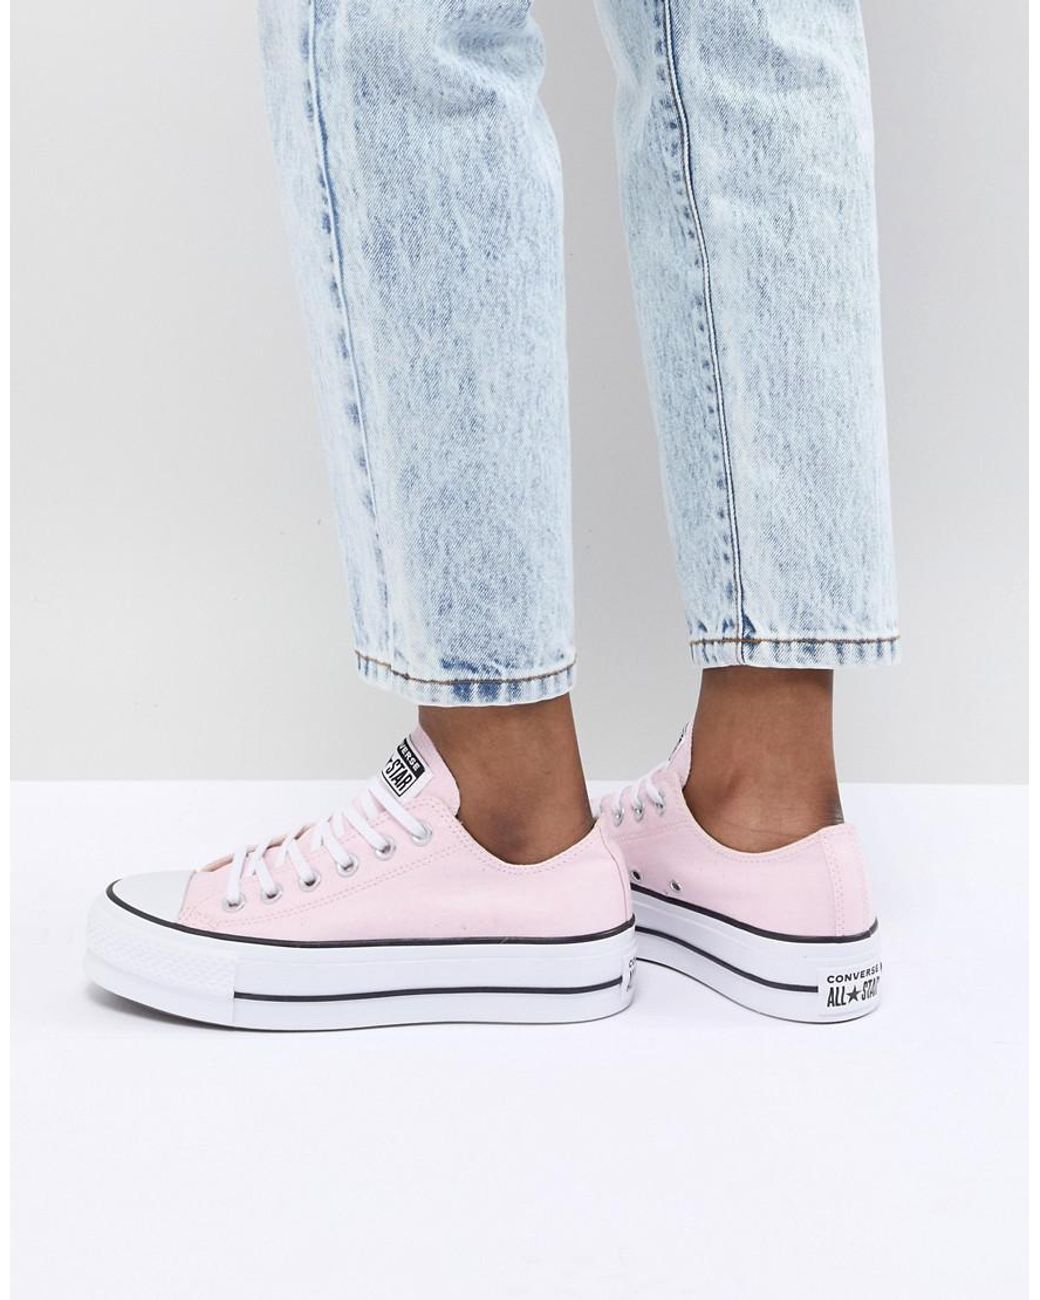 Converse Chuck Taylor All Star Platform Sneakers In Pink | Lyst